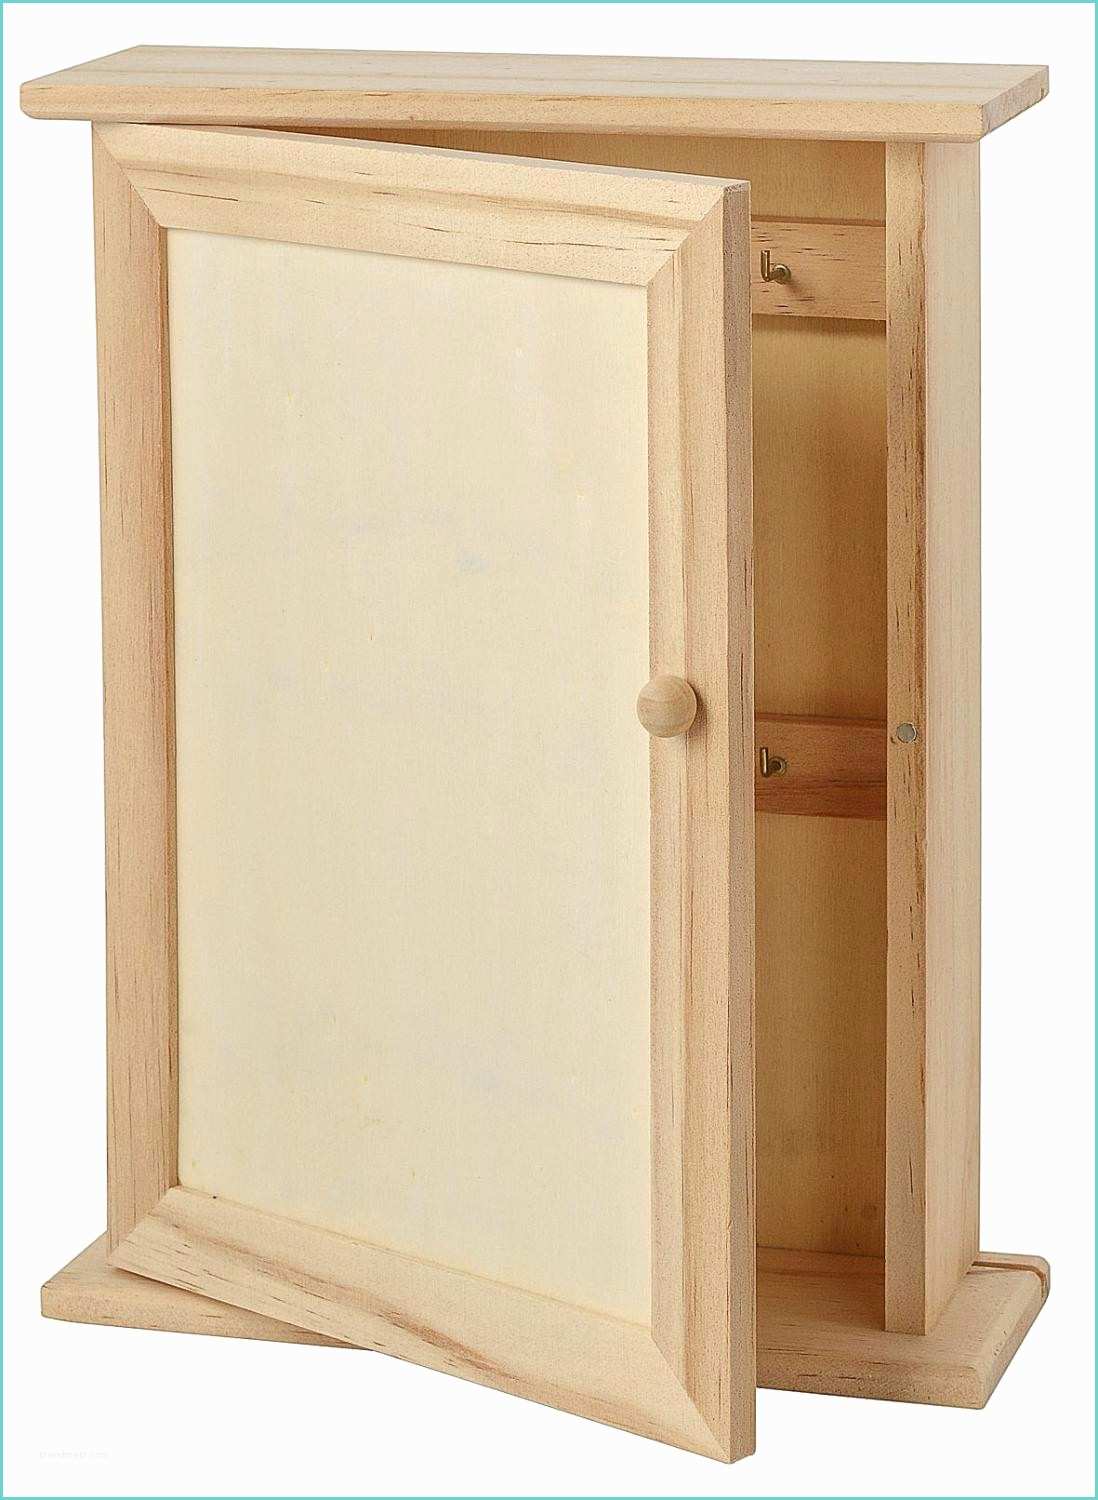 Armoire A Cls Ikea Fabulous Rangement Cls Luxe Bo Te Cl S Vbs Loisirs Cr